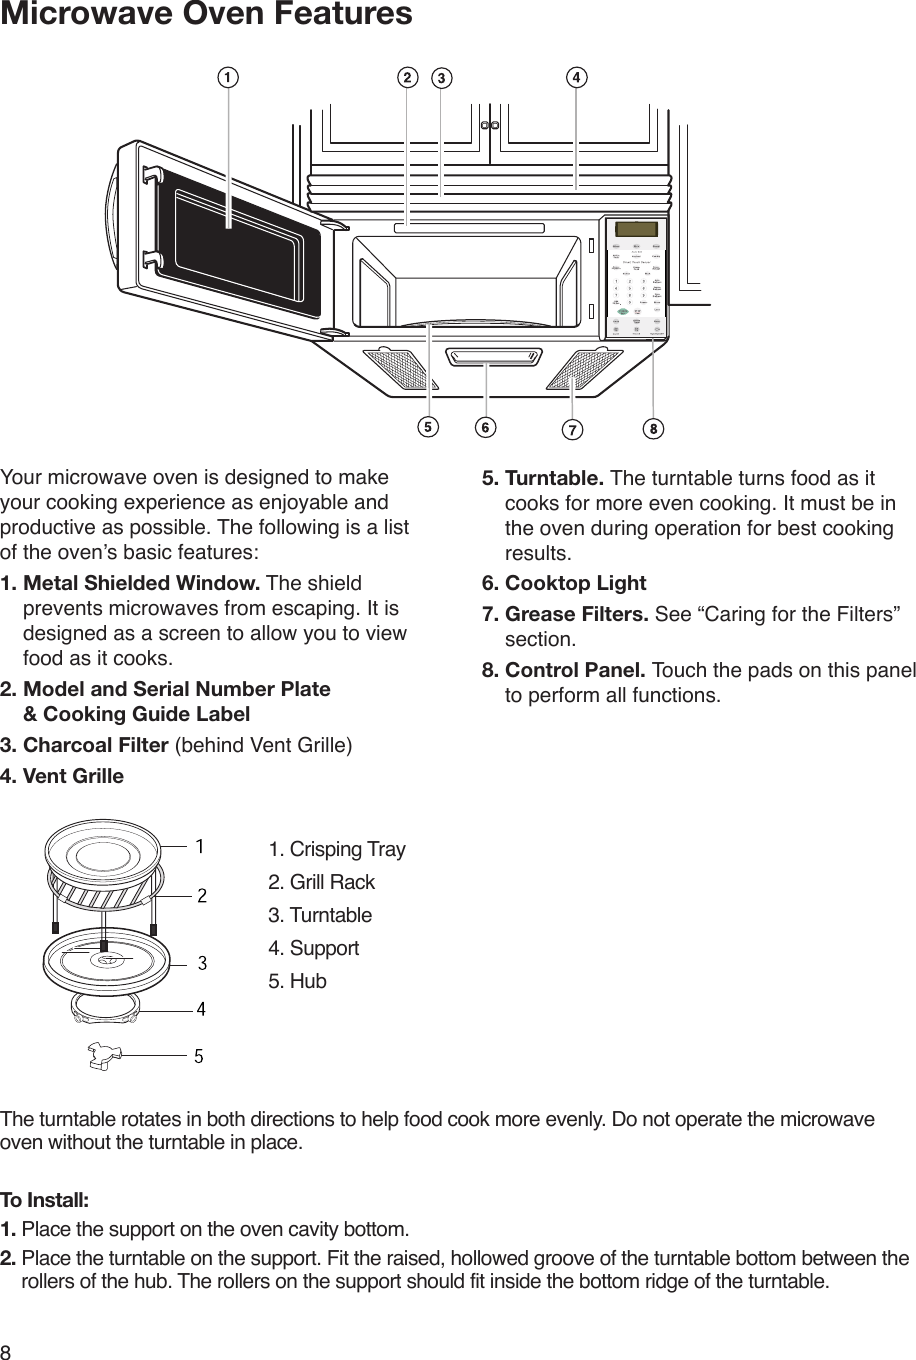 8GETTING TO KNOW YOUR MICROWAVE OVEN    Microwave Oven FeaturesYour microwave oven is designed to make your cooking experience as enjoyable and productive as possible. The following is a list  of the oven’s basic features:1.  Metal Shielded Window. The shield prevents microwaves from escaping. It is designed as a screen to allow you to view food as it cooks.2.  Model and Serial Number Plate  &amp; Cooking Guide Label3. Charcoal Filter (behind Vent Grille)4. Vent Grille5.  Turntable. The turntable turns food as it cooks for more even cooking. It must be in the oven during operation for best cooking results.6. Cooktop Light7.  Grease Filters. See “Caring for the Filters” section.8.  Control Panel. Touch the pads on this panel to perform all functions.The turntable rotates in both directions to help food cook more evenly. Do not operate the microwave oven without the turntable in place.To Install:1. Place the support on the oven cavity bottom.2.  Place the turntable on the support. Fit the raised, hollowed groove of the turntable bottom between the rollers of the hub. The rollers on the support should fit inside the bottom ridge of the turntable.1. Crisping Tray2. Grill Rack3. Turntable 4. Support5. Hub